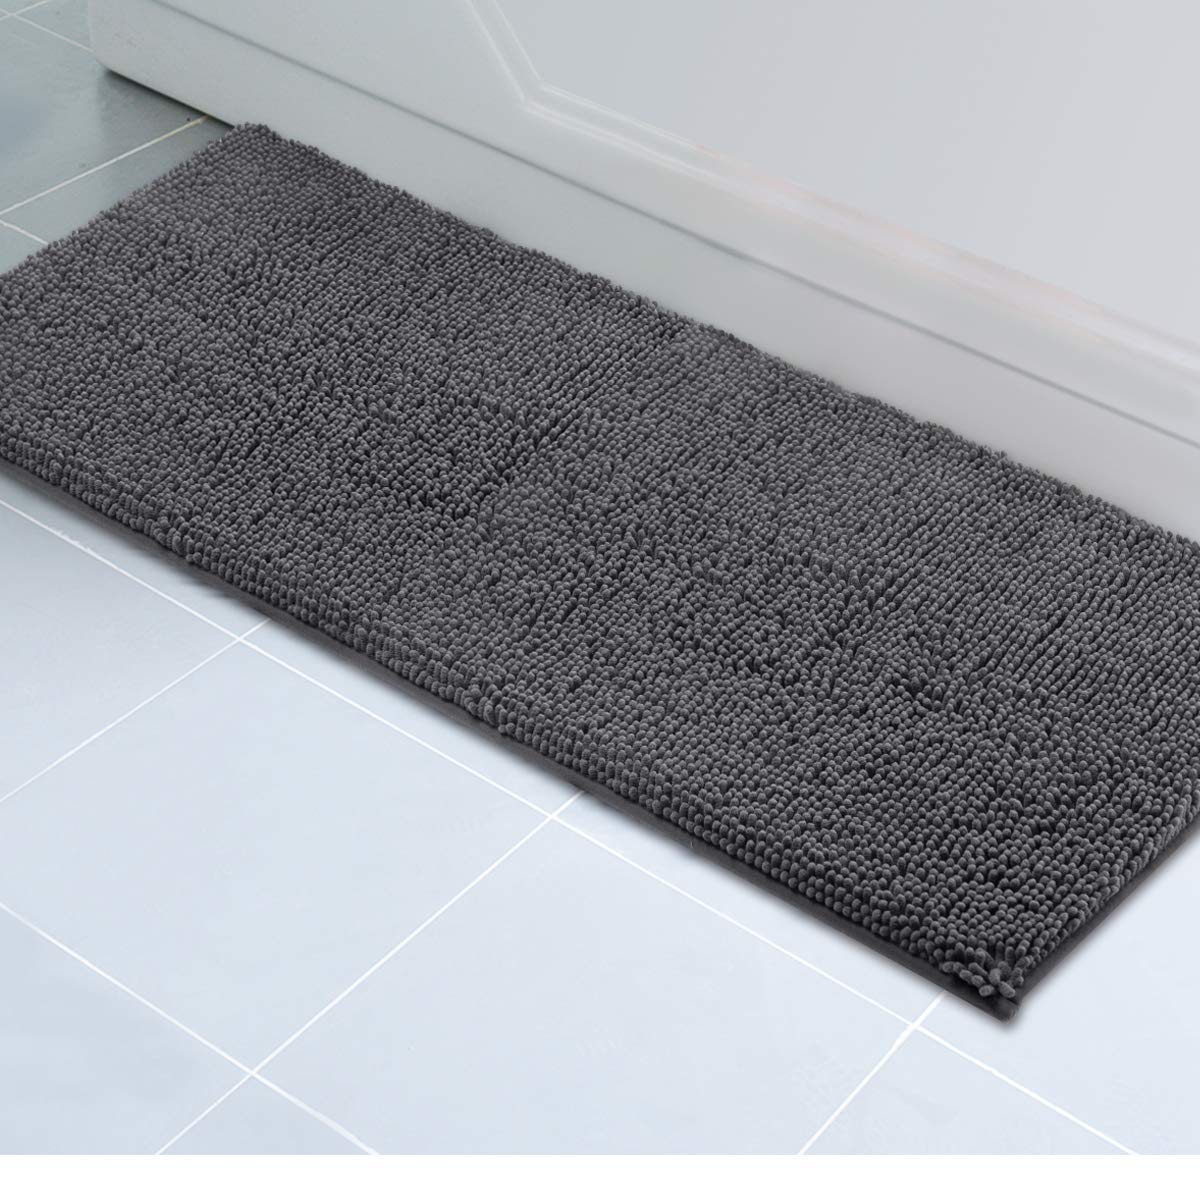 Book Cover ITSOFT Plush Microfiber Long Runner - Non Slip Soft Bathroom Rug, Absorbent Machine Washable Chenille Bath Mat | Quick Dry Carpet, Great for Bath, Shower, Bedroom, or Door Mat (Charcoal Gray, 59x21) 59 x 21 Inch Charcoal Gray